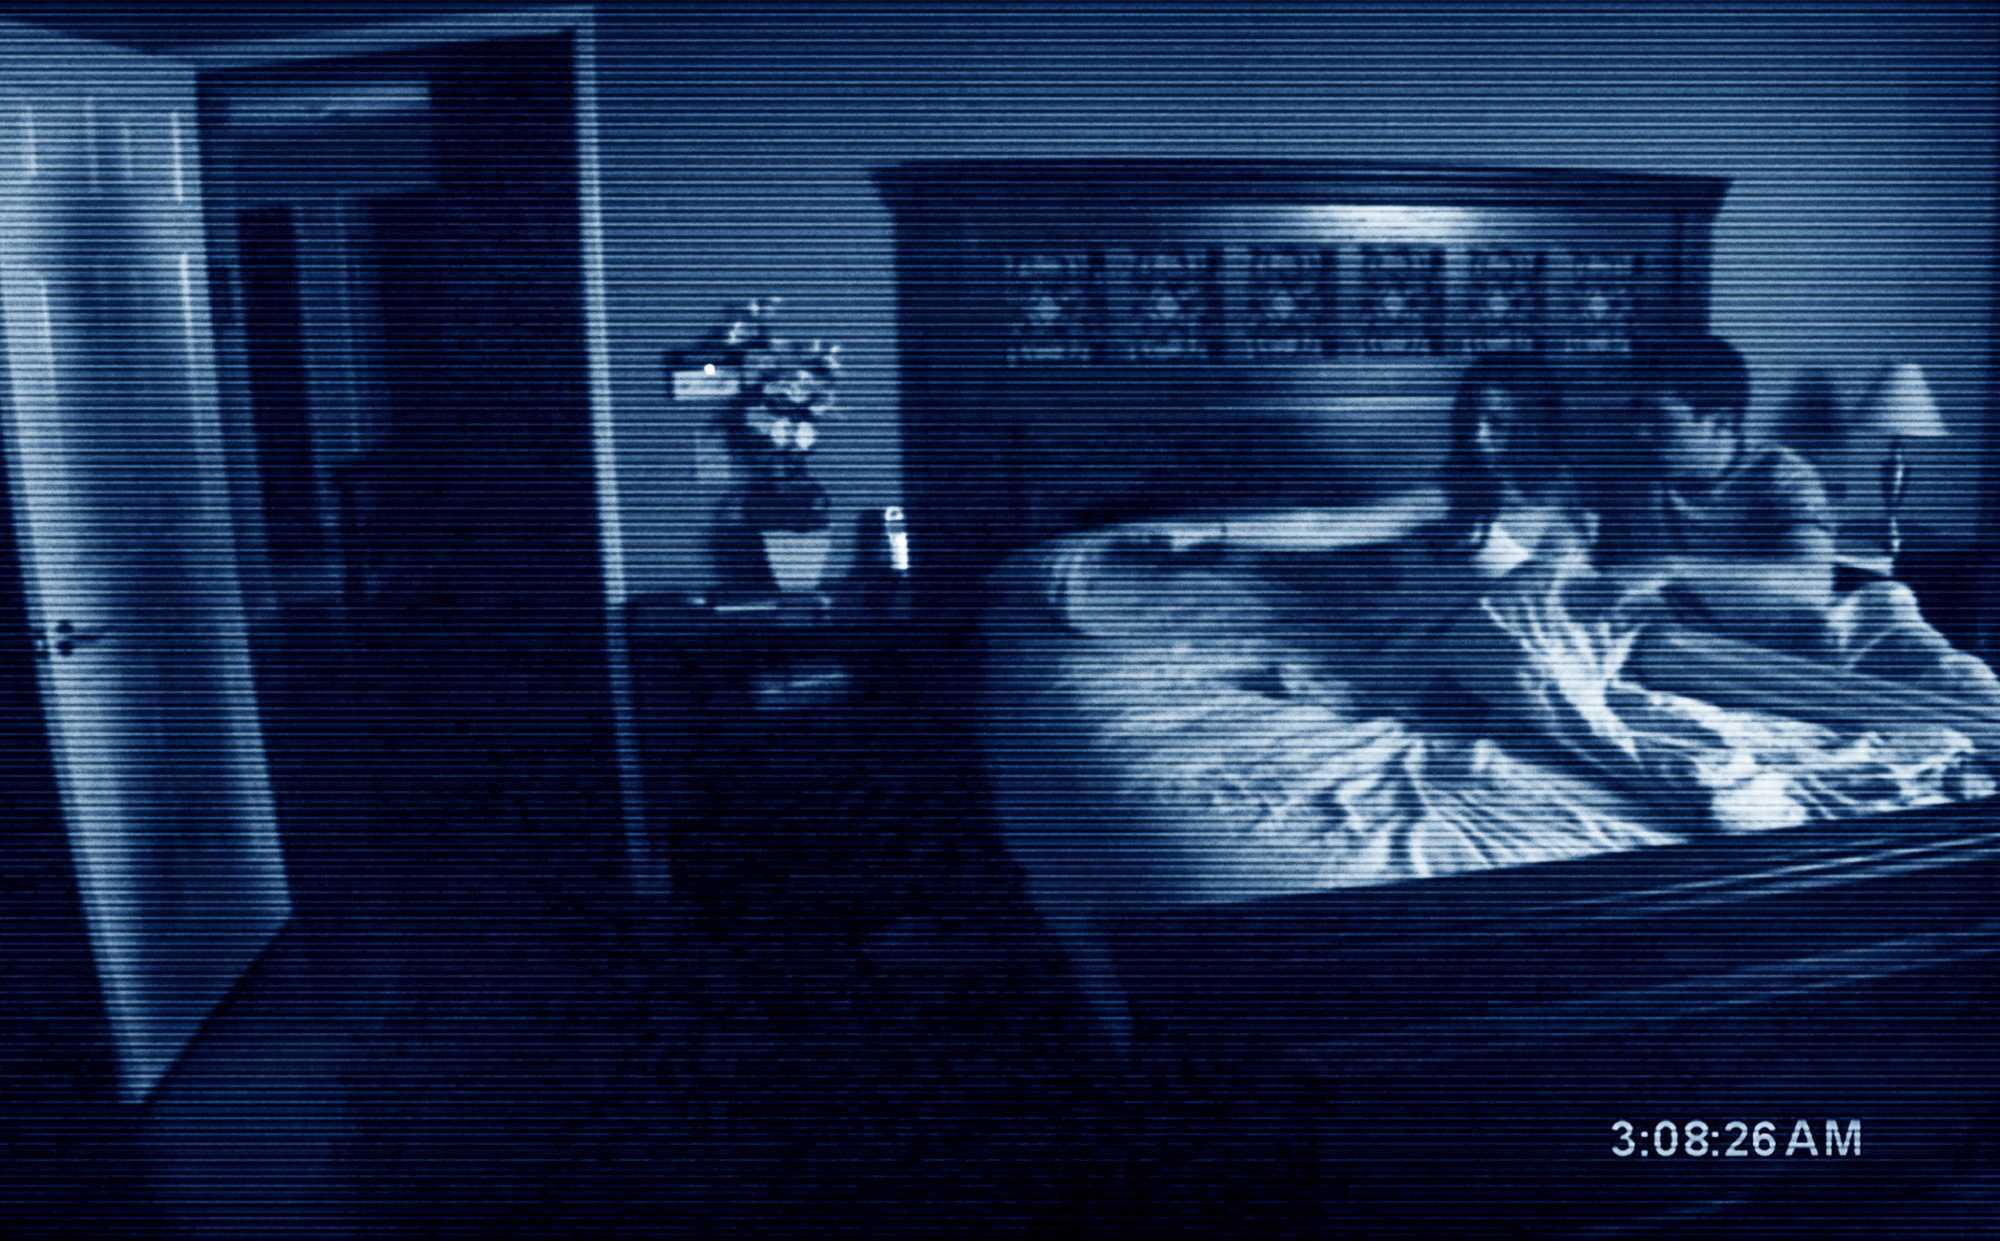 Paranormal-Activity-5-the-ghost-dimension